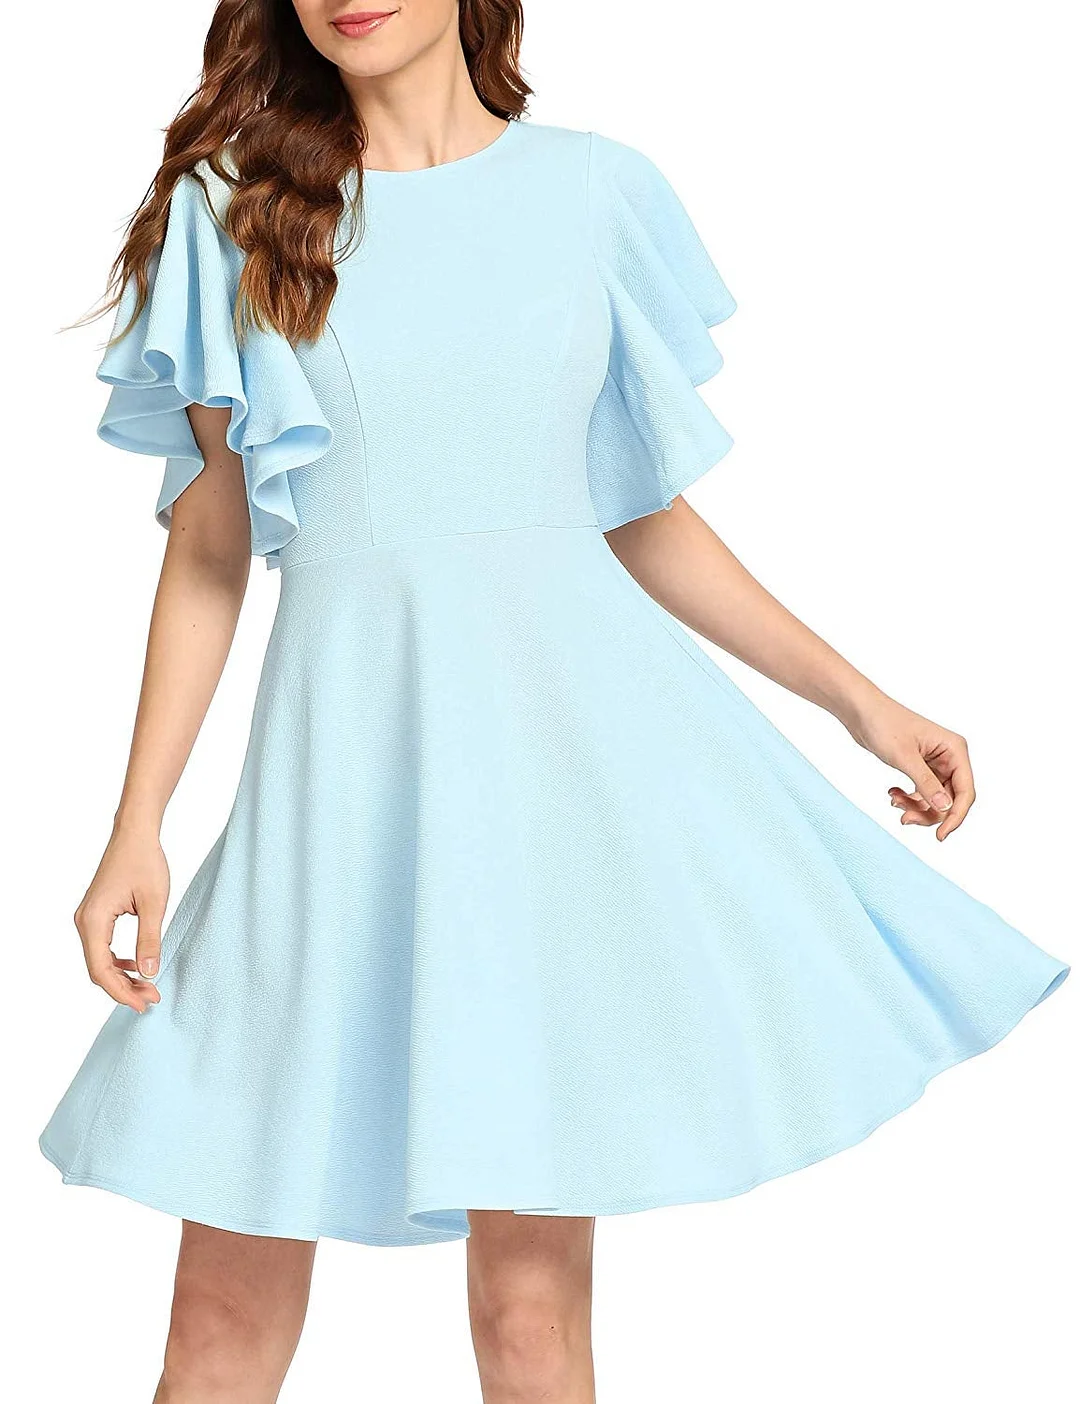 Women's Stretchy A Line Swing Flared Skater Cocktail Party Dress